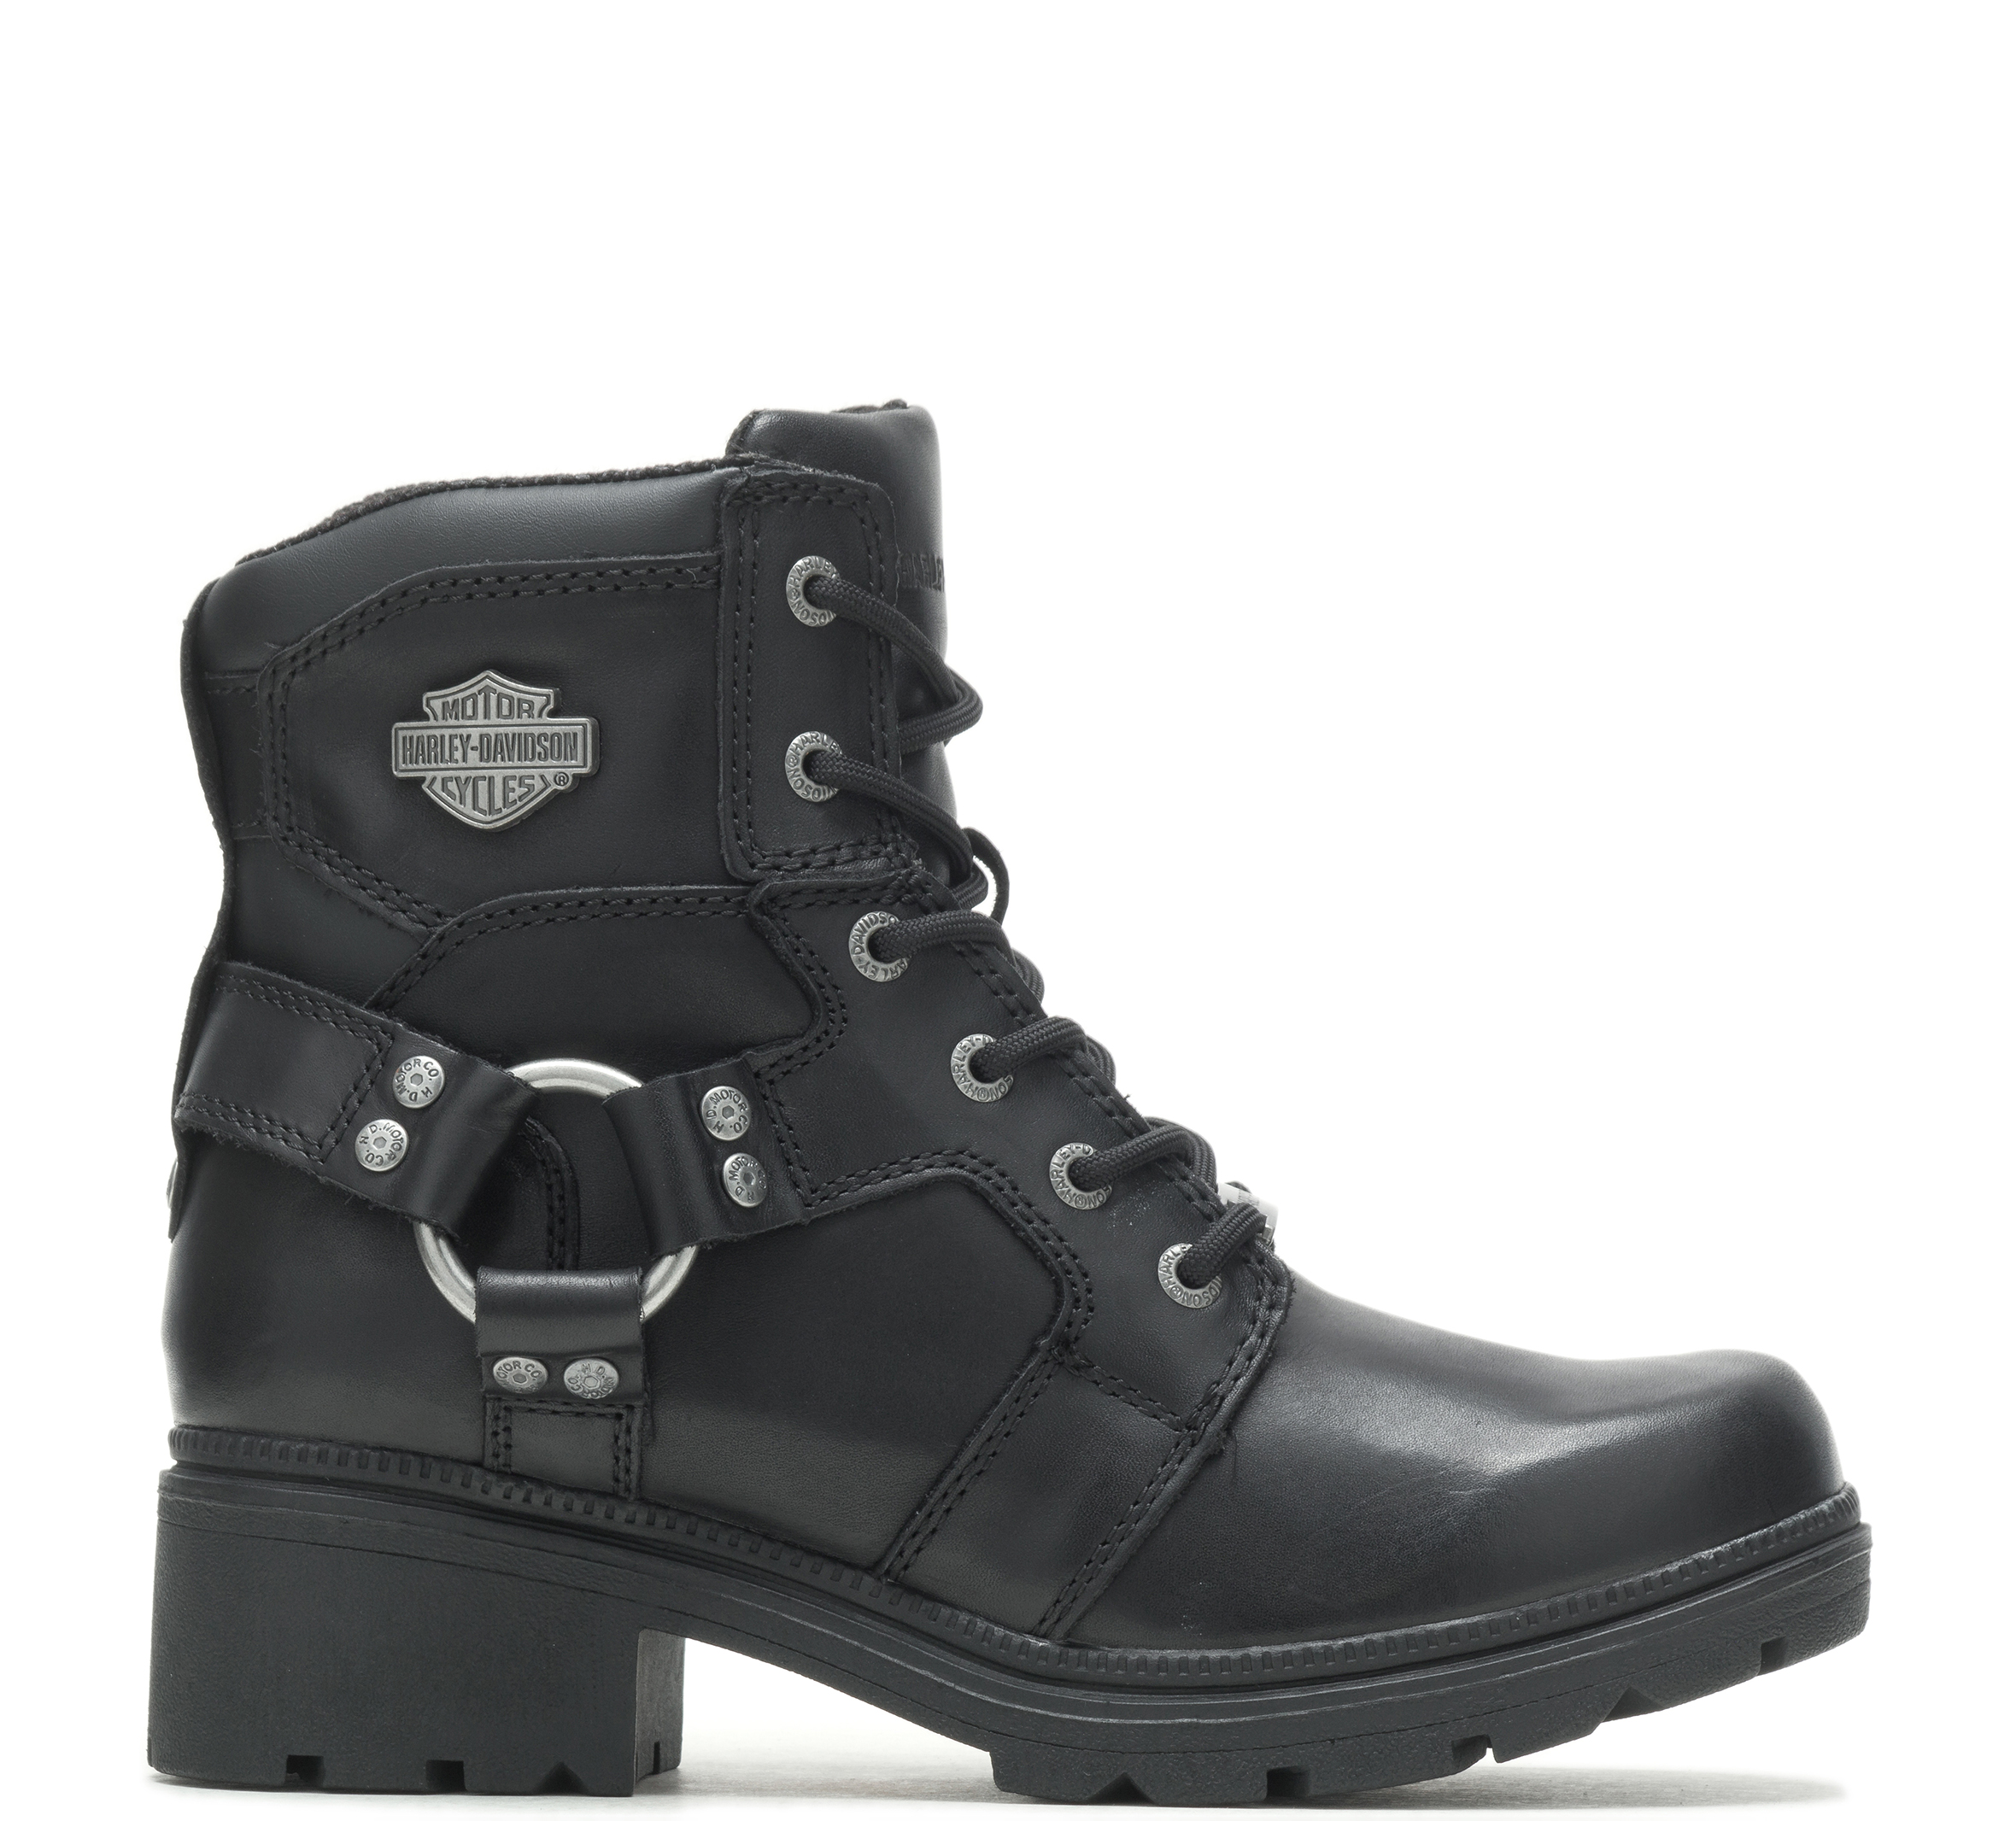 Women's Motorcycle Boots & Shoes | Harley-Davidson USA